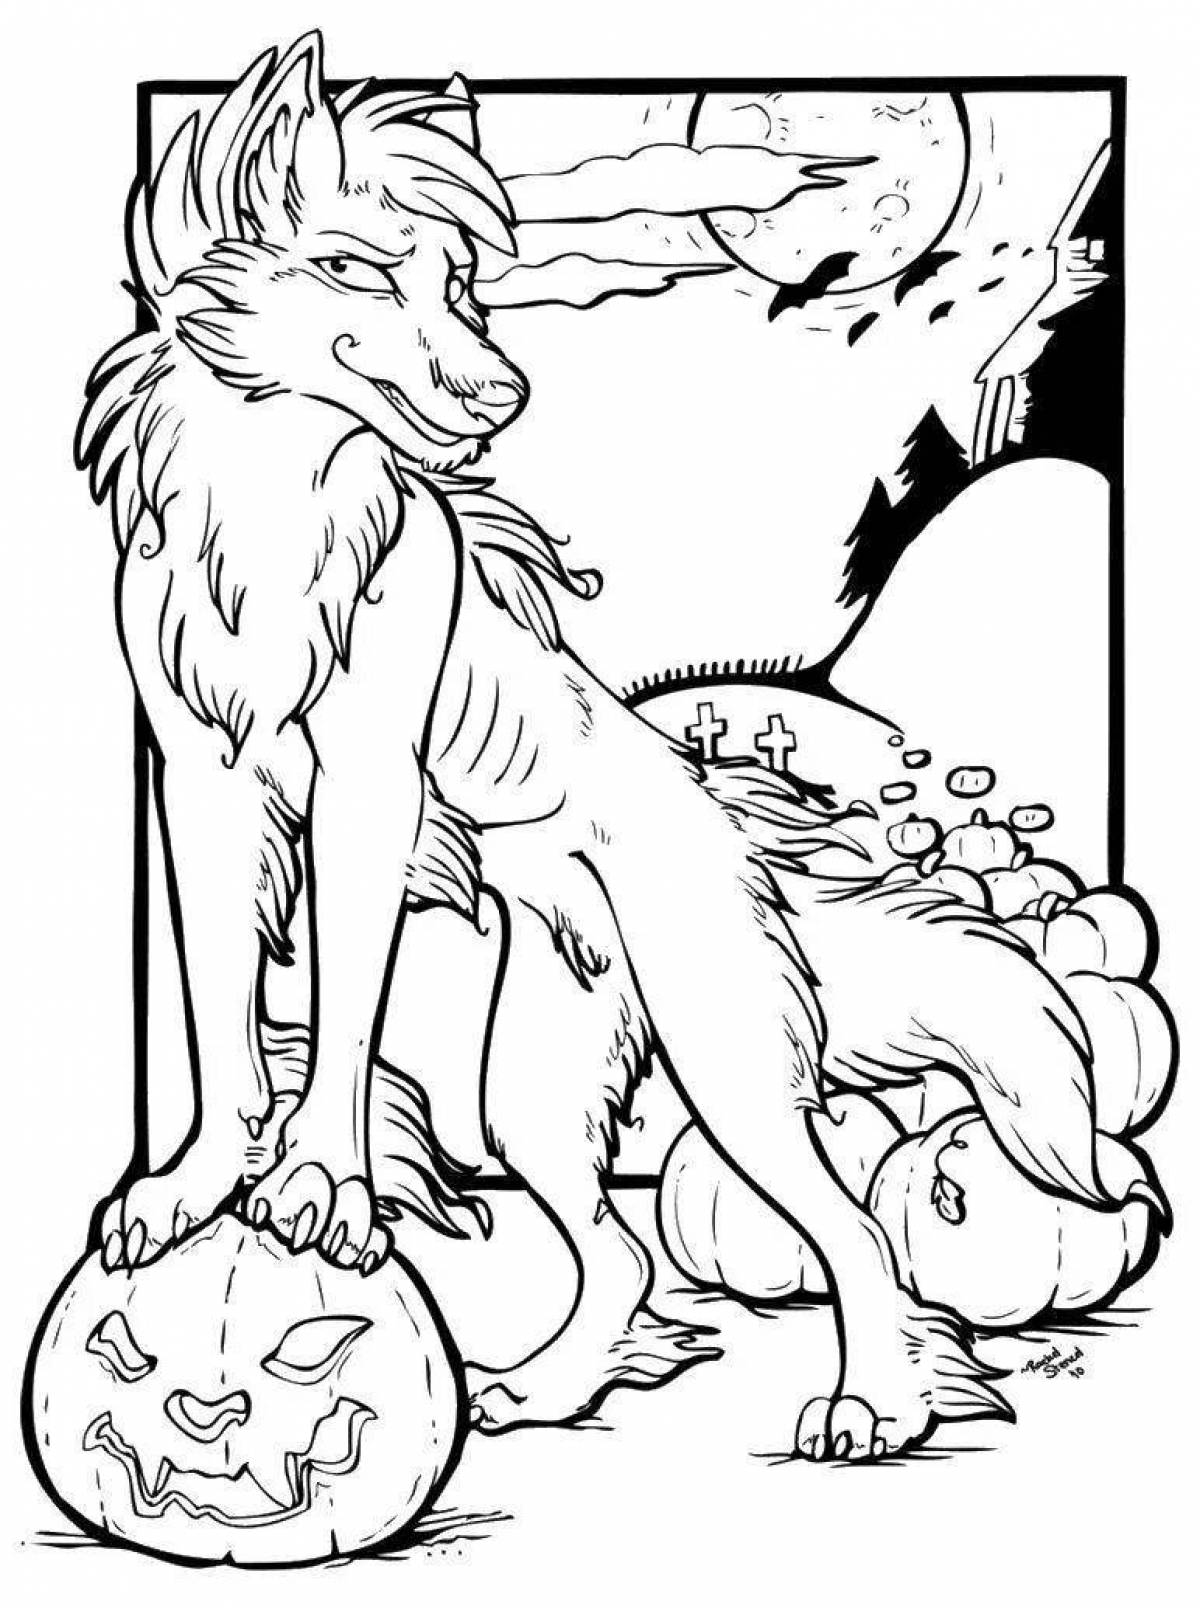 Adorable wolf legend coloring book